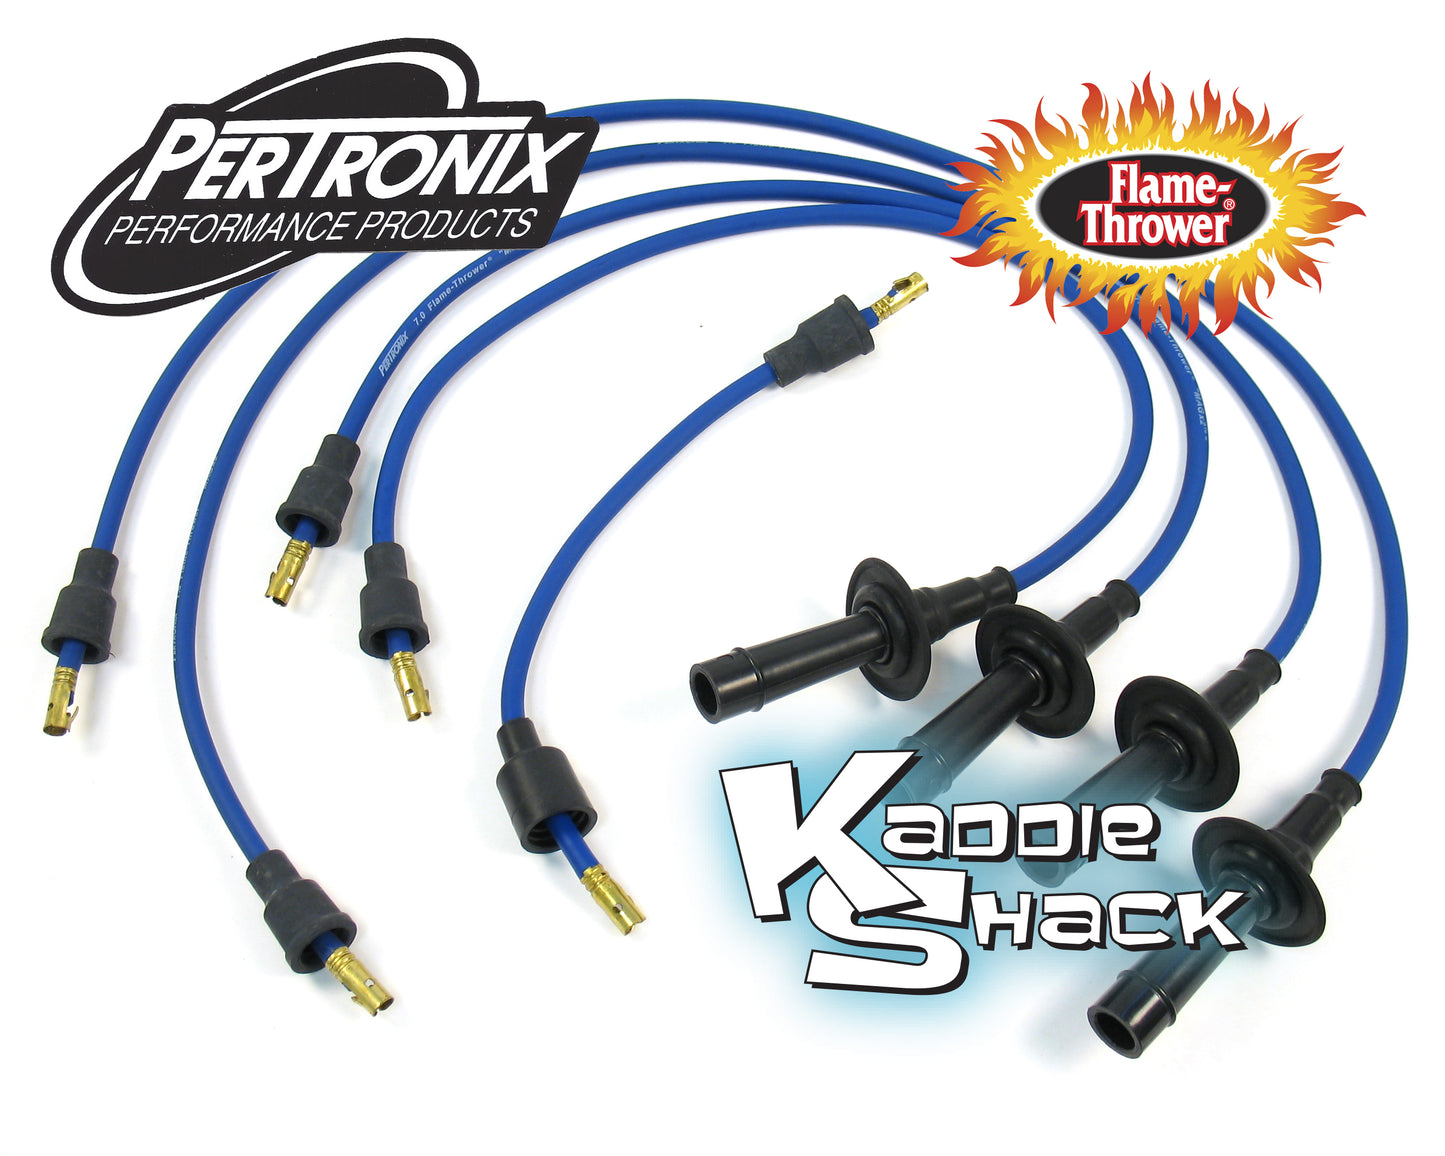 Pertronix Flame-Thrower 7mm Spark Plug Wires, Blue